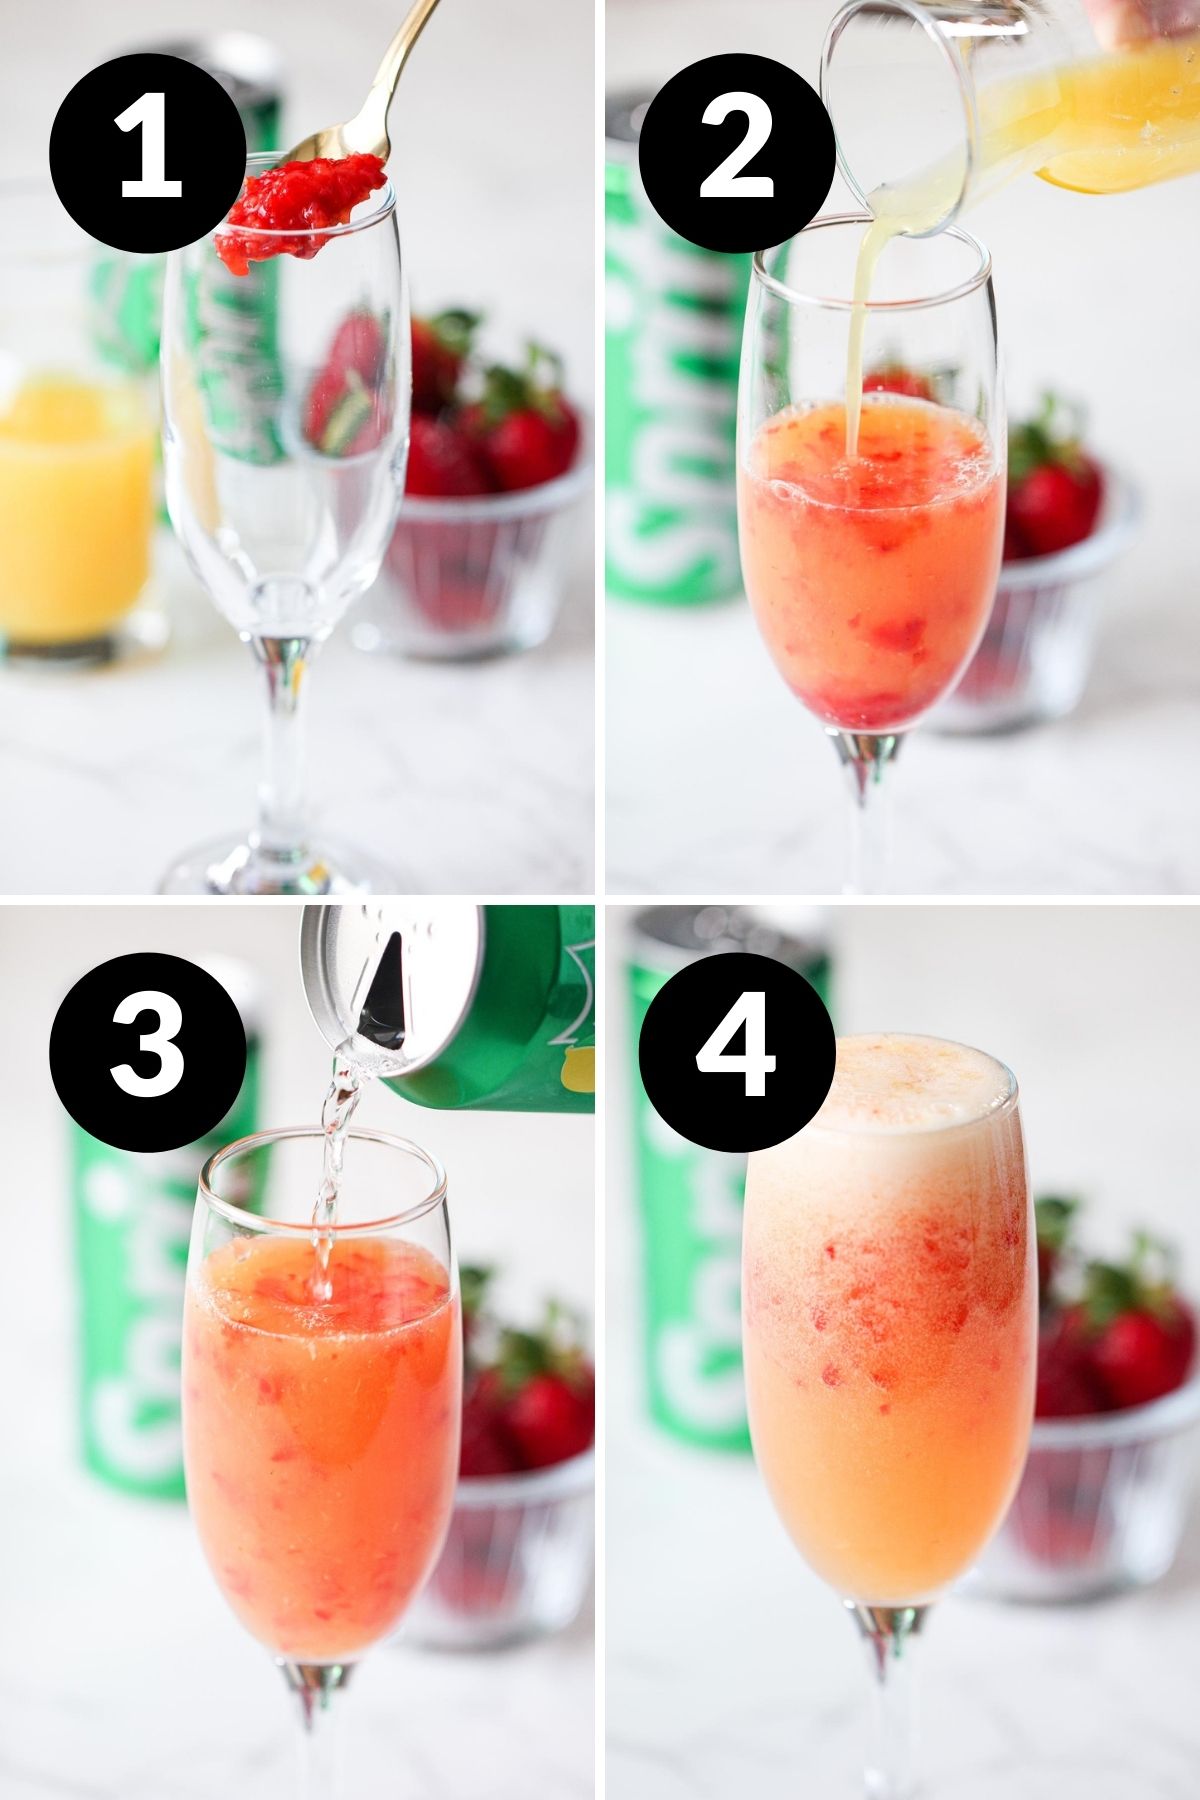 How to Make Strawberry Mimosa Mocktail